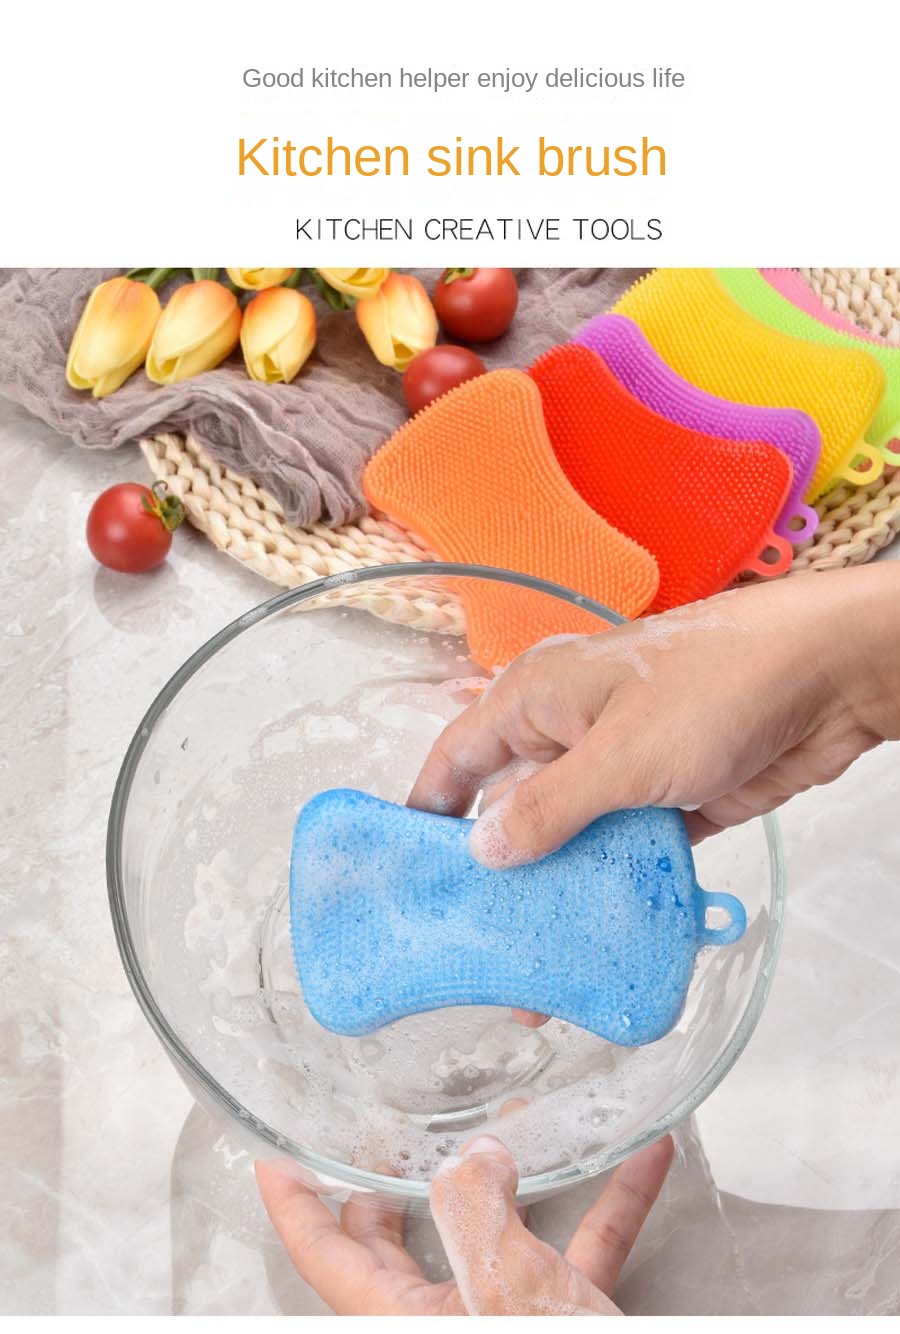  Lubrima Silicone Sponge Dish Sponges, Sponges for Cleaning  Dishes, Kitchen Gadgets, 3 Scrub Sponges for Dishes Kitchen Sponges Scrubber  Brush Household Supplies Accessories : Health & Household